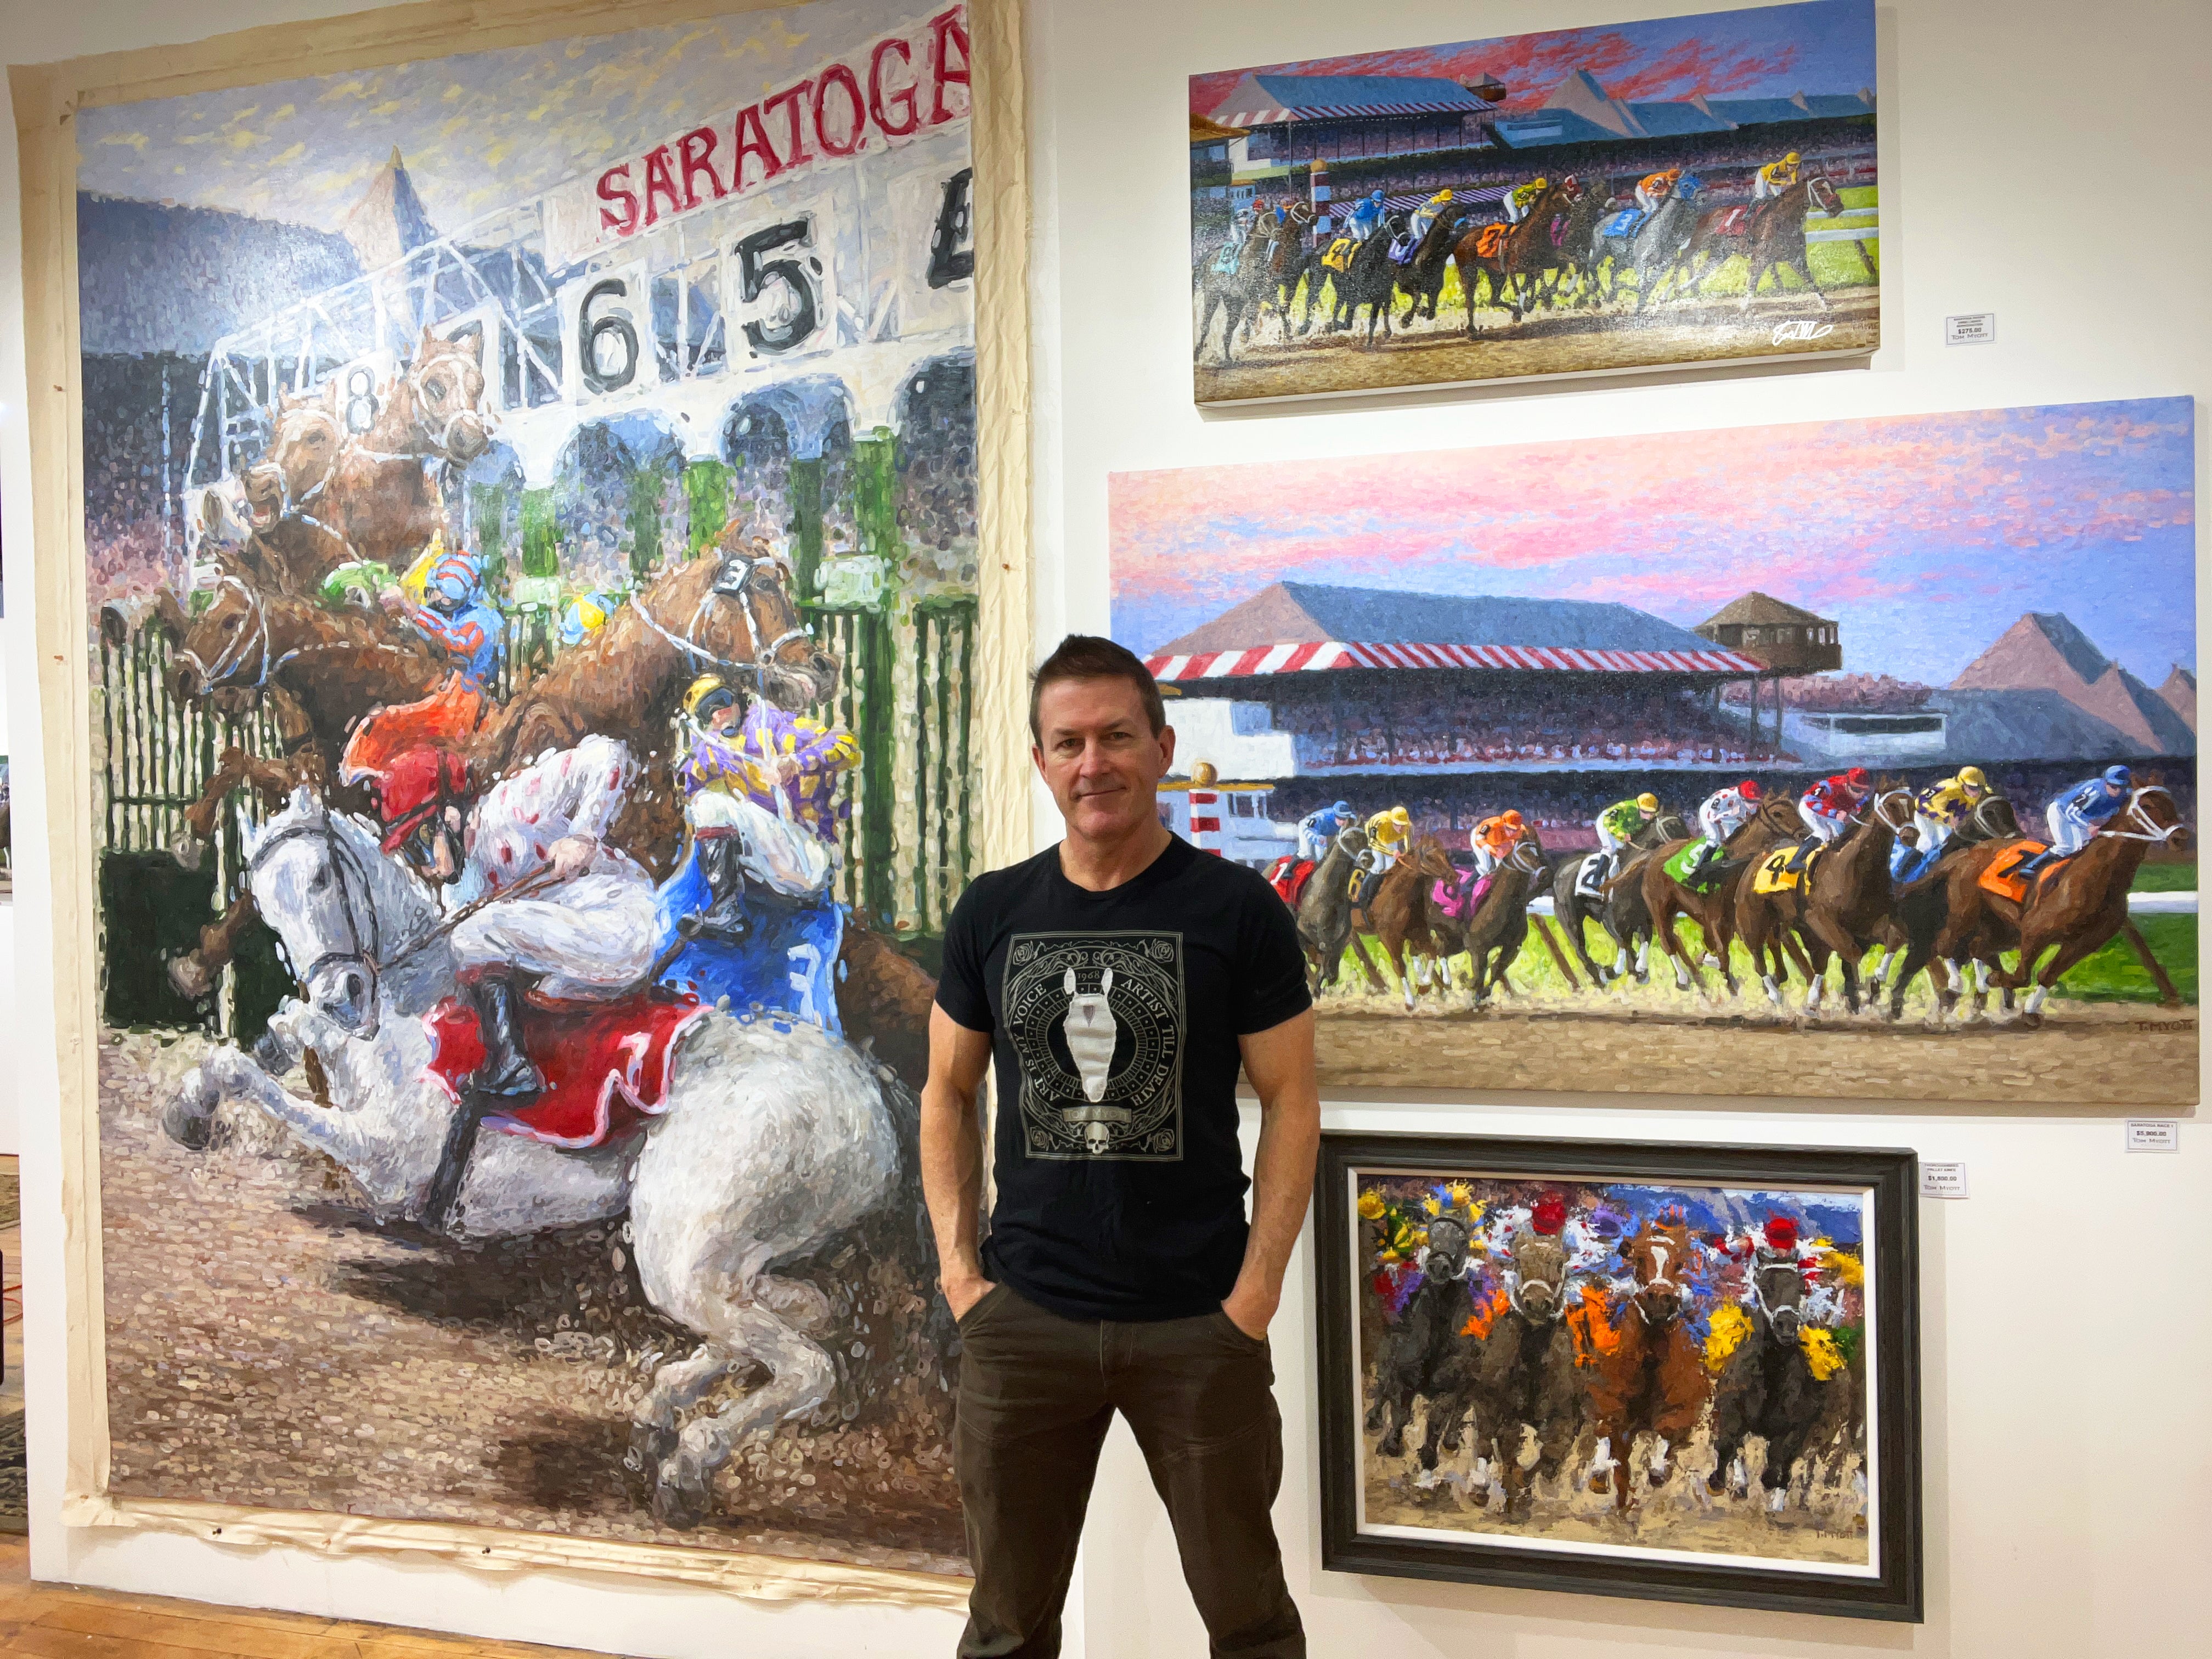 Artist Tom Myott poses in his studio with a proud smile, standing in front of his vibrant paintings of horse racing scenes at Saratoga Race Course. The paintings capture dynamic moments of races, featuring jockeys in colorful silks on galloping horses, with one large painting prominently displaying the iconic Saratoga starting gate. The artwork exhibits Myott’s expressive brushwork and vivid use of color, showcasing his talent in equine art.